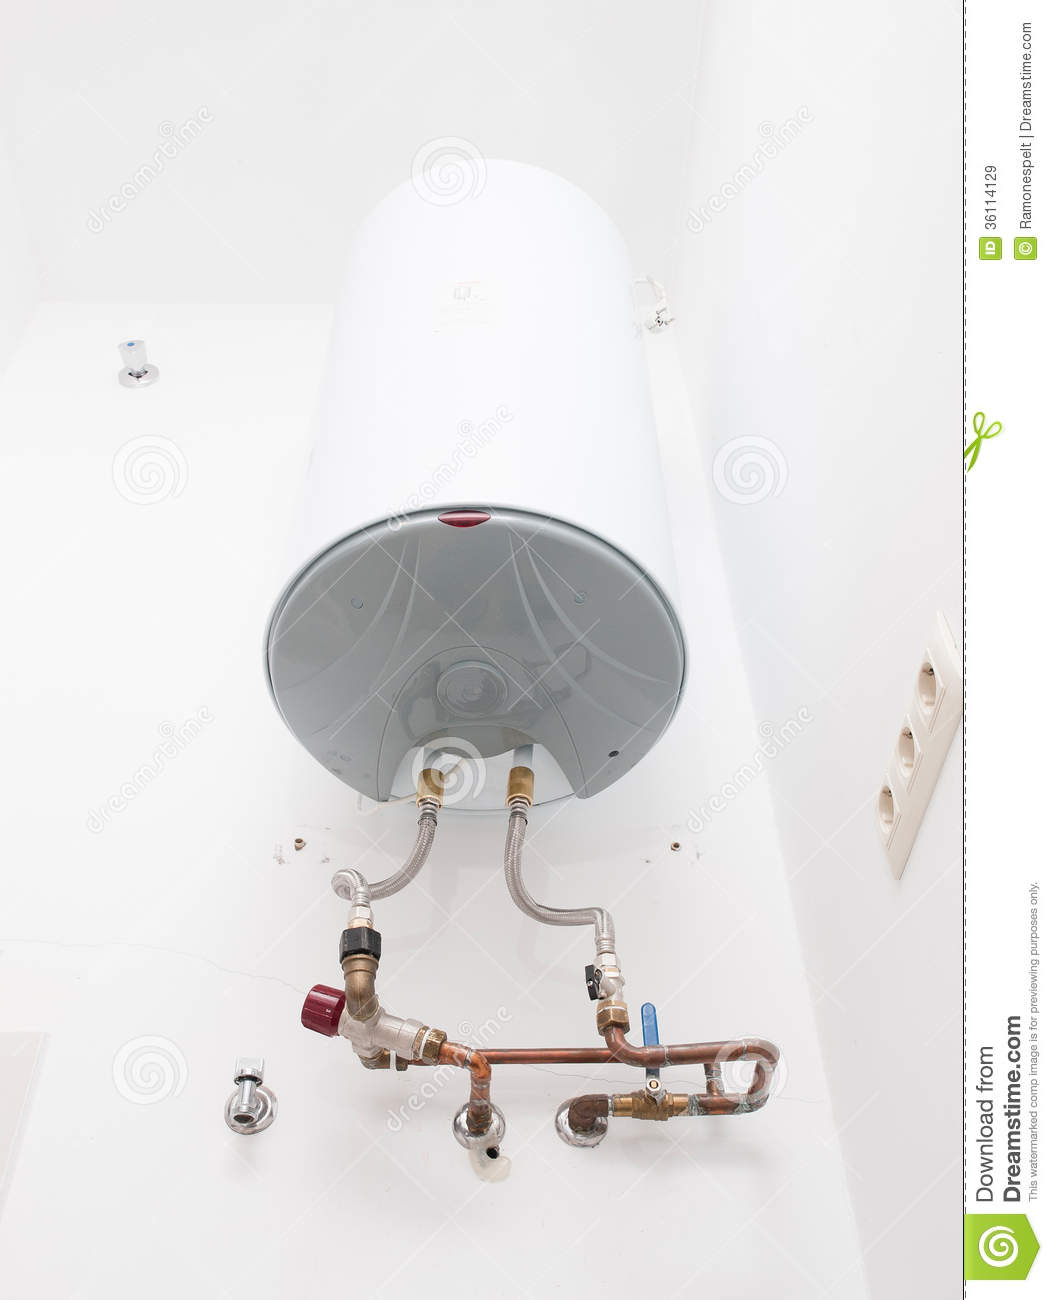 Electric Water Heater In A Wall Royalty Free Stock Images   Image    